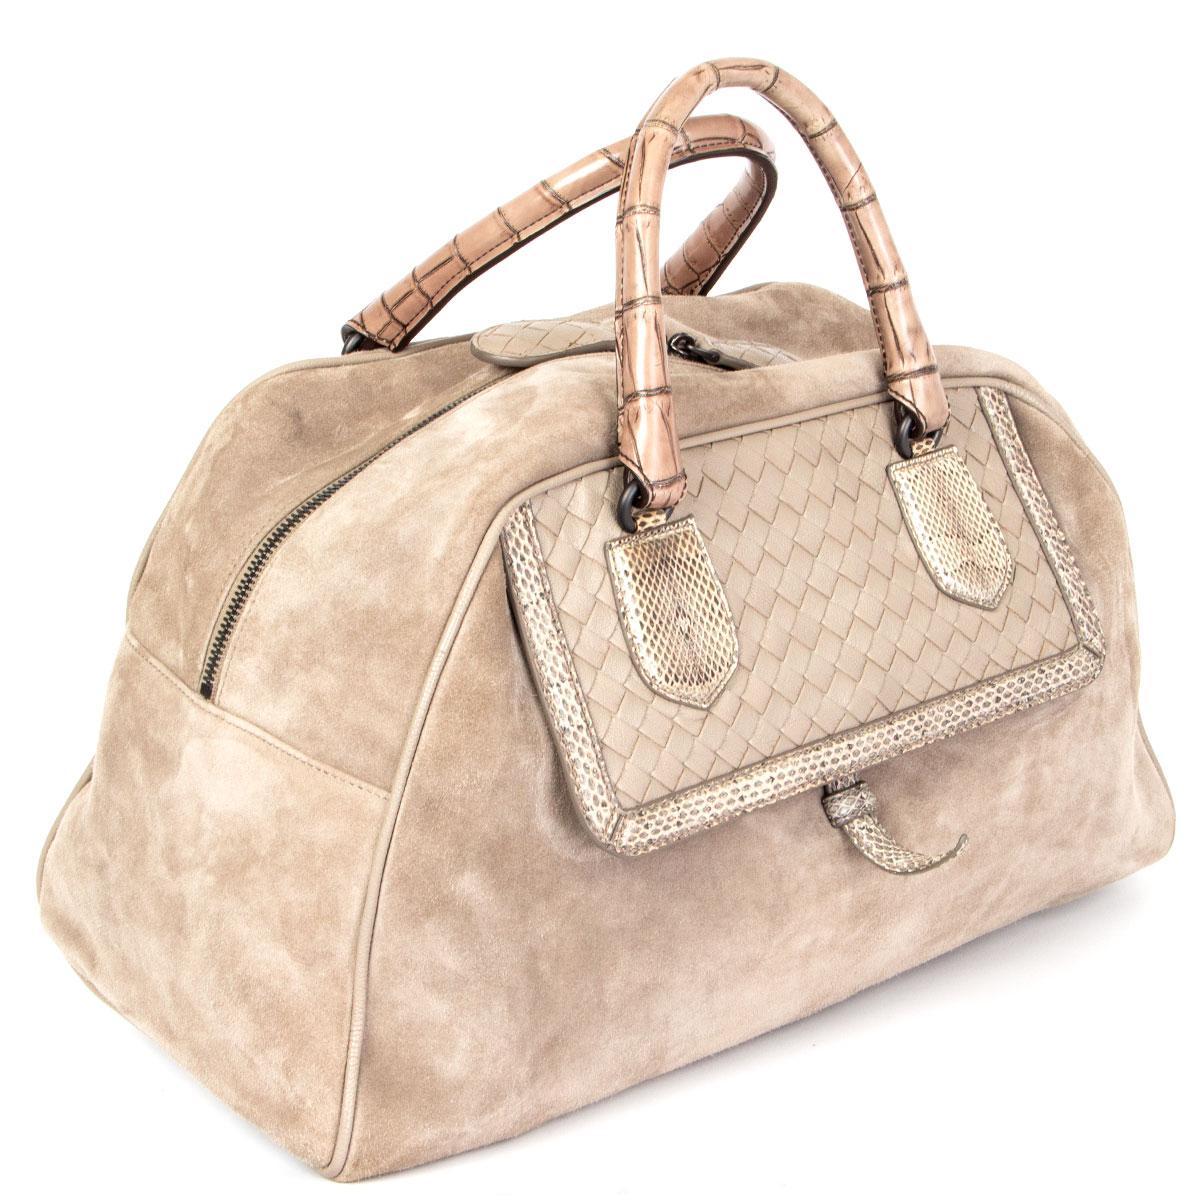 100% authentic Bottega Veneta bowling style hand-bag in light taupe suede, light grey leather featuring crocodile handles and ayers snakeskin trimming details. Opens with a double-zip on top and is lined in light taupe nappa leather with one zip